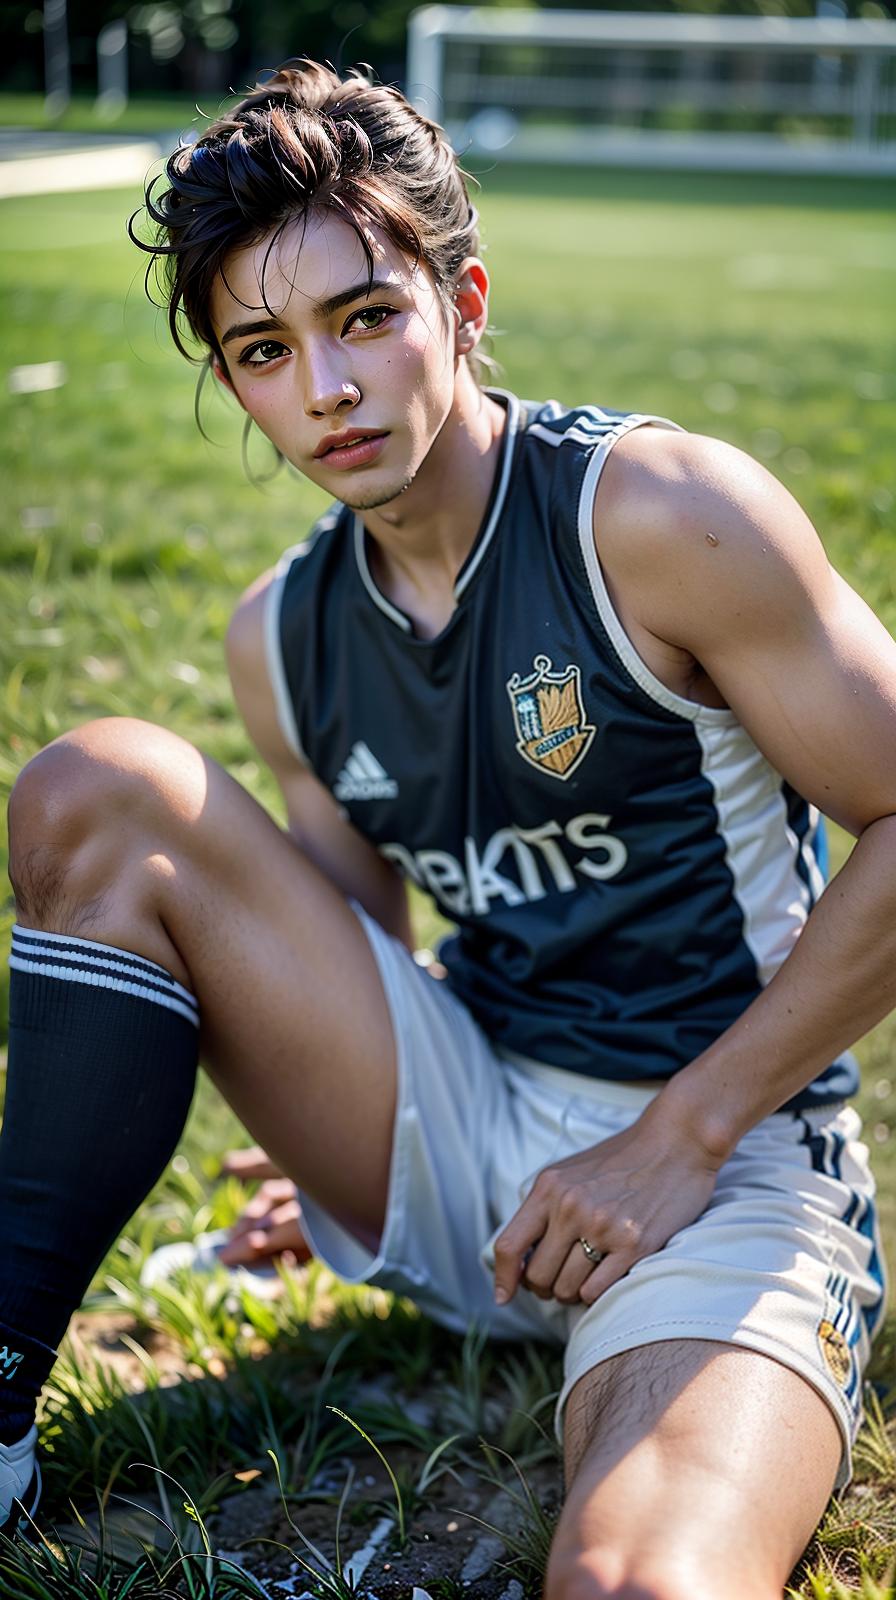  ultra high res, (photorealistic:1.4), raw photo, (realistic face), realistic eyes, (realistic skin), <lora:XXMix9_v20LoRa:0.8>, (handsome:1.4), (male:2.1), (young soccer players:1.3), (pompadour:1.2), (white briefs:1.3), (sleeveless:1.2), spike shoes, (soccer shin guards:1.3), young, sitting posture, (spread legs:1.1), real skin, (sexy posing:1.3), hot guy, (muscular:1.3), (naked:1.1), (bulge:1.1), trained calves, thigh, realistic, lifelike, high quality, photos taken with a single-lens reflex camera, (looking at the camera:1.2)